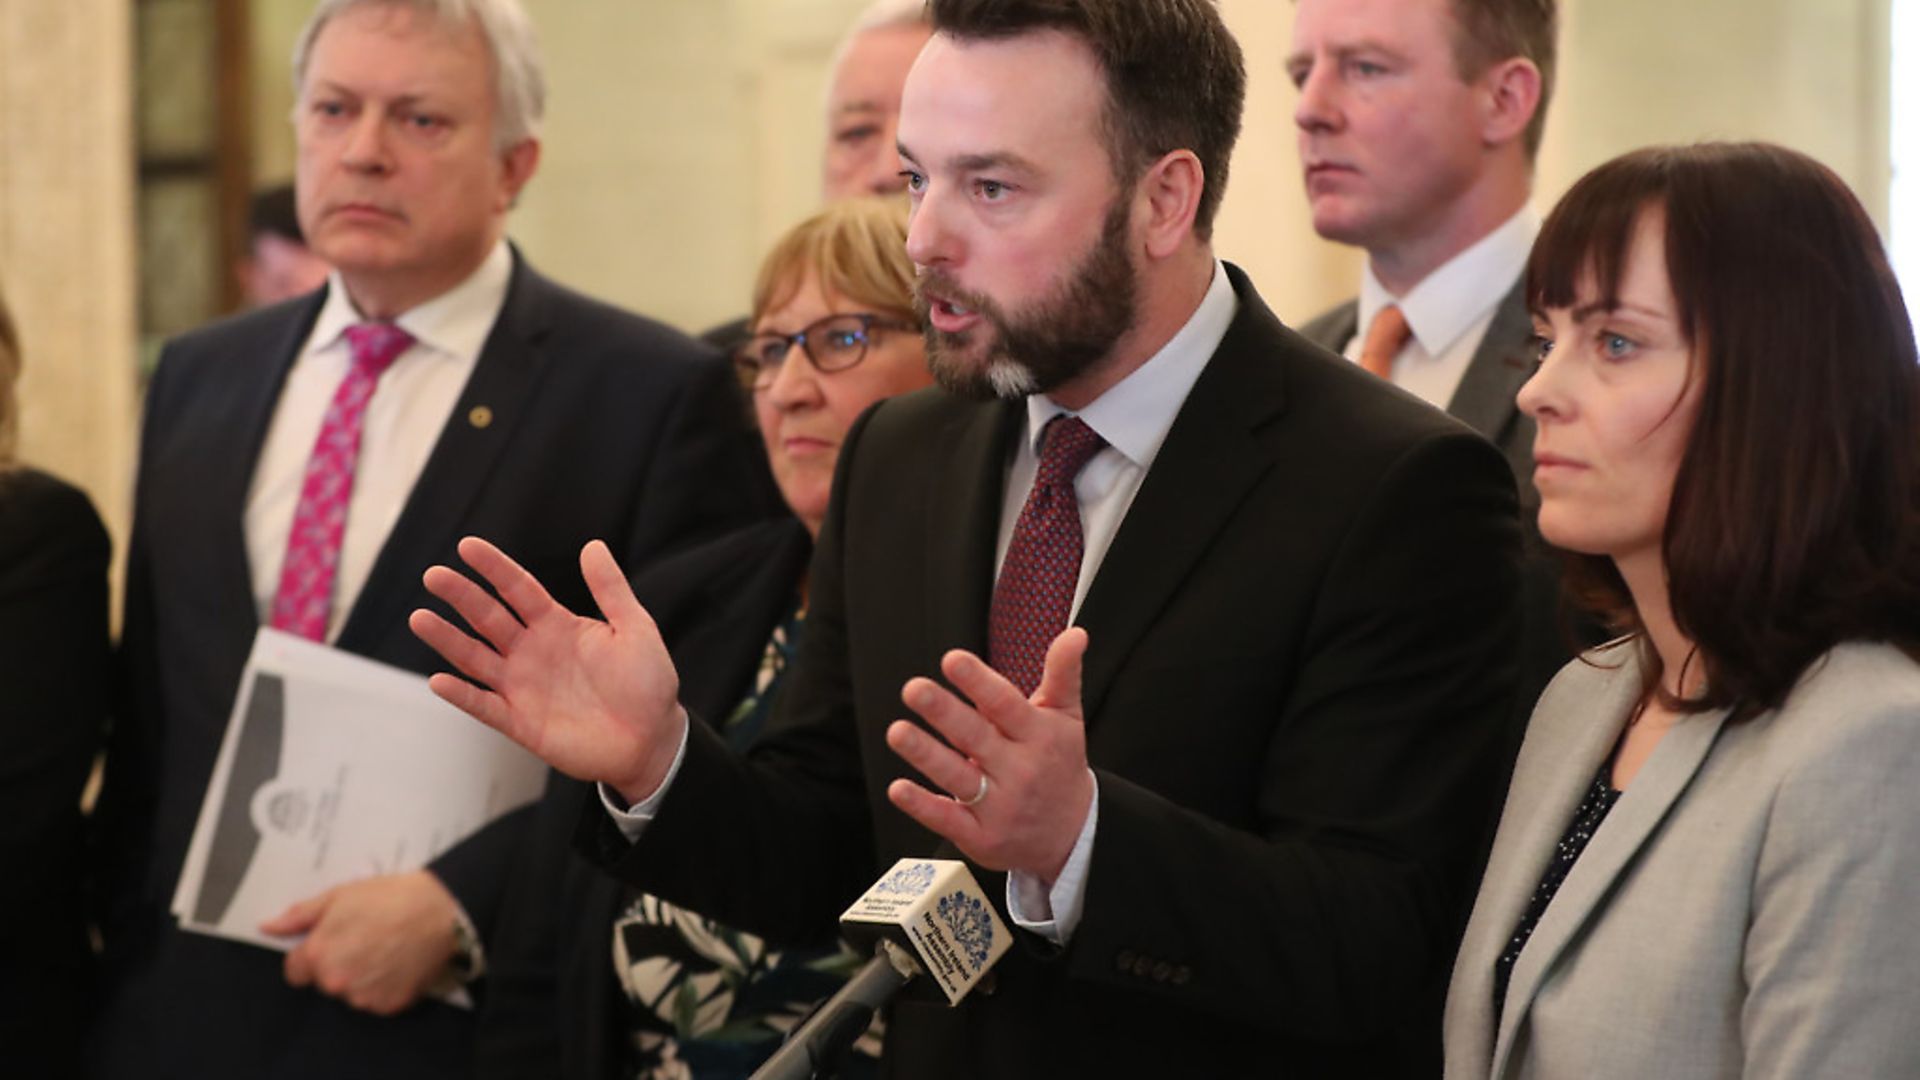 SDLP leader Colum Eastwood, with his MLAs, speaking to the media in Stormont parliament buildings in Belfast. Photograph: Niall Carson/PA. - Credit: PA Wire/PA Images